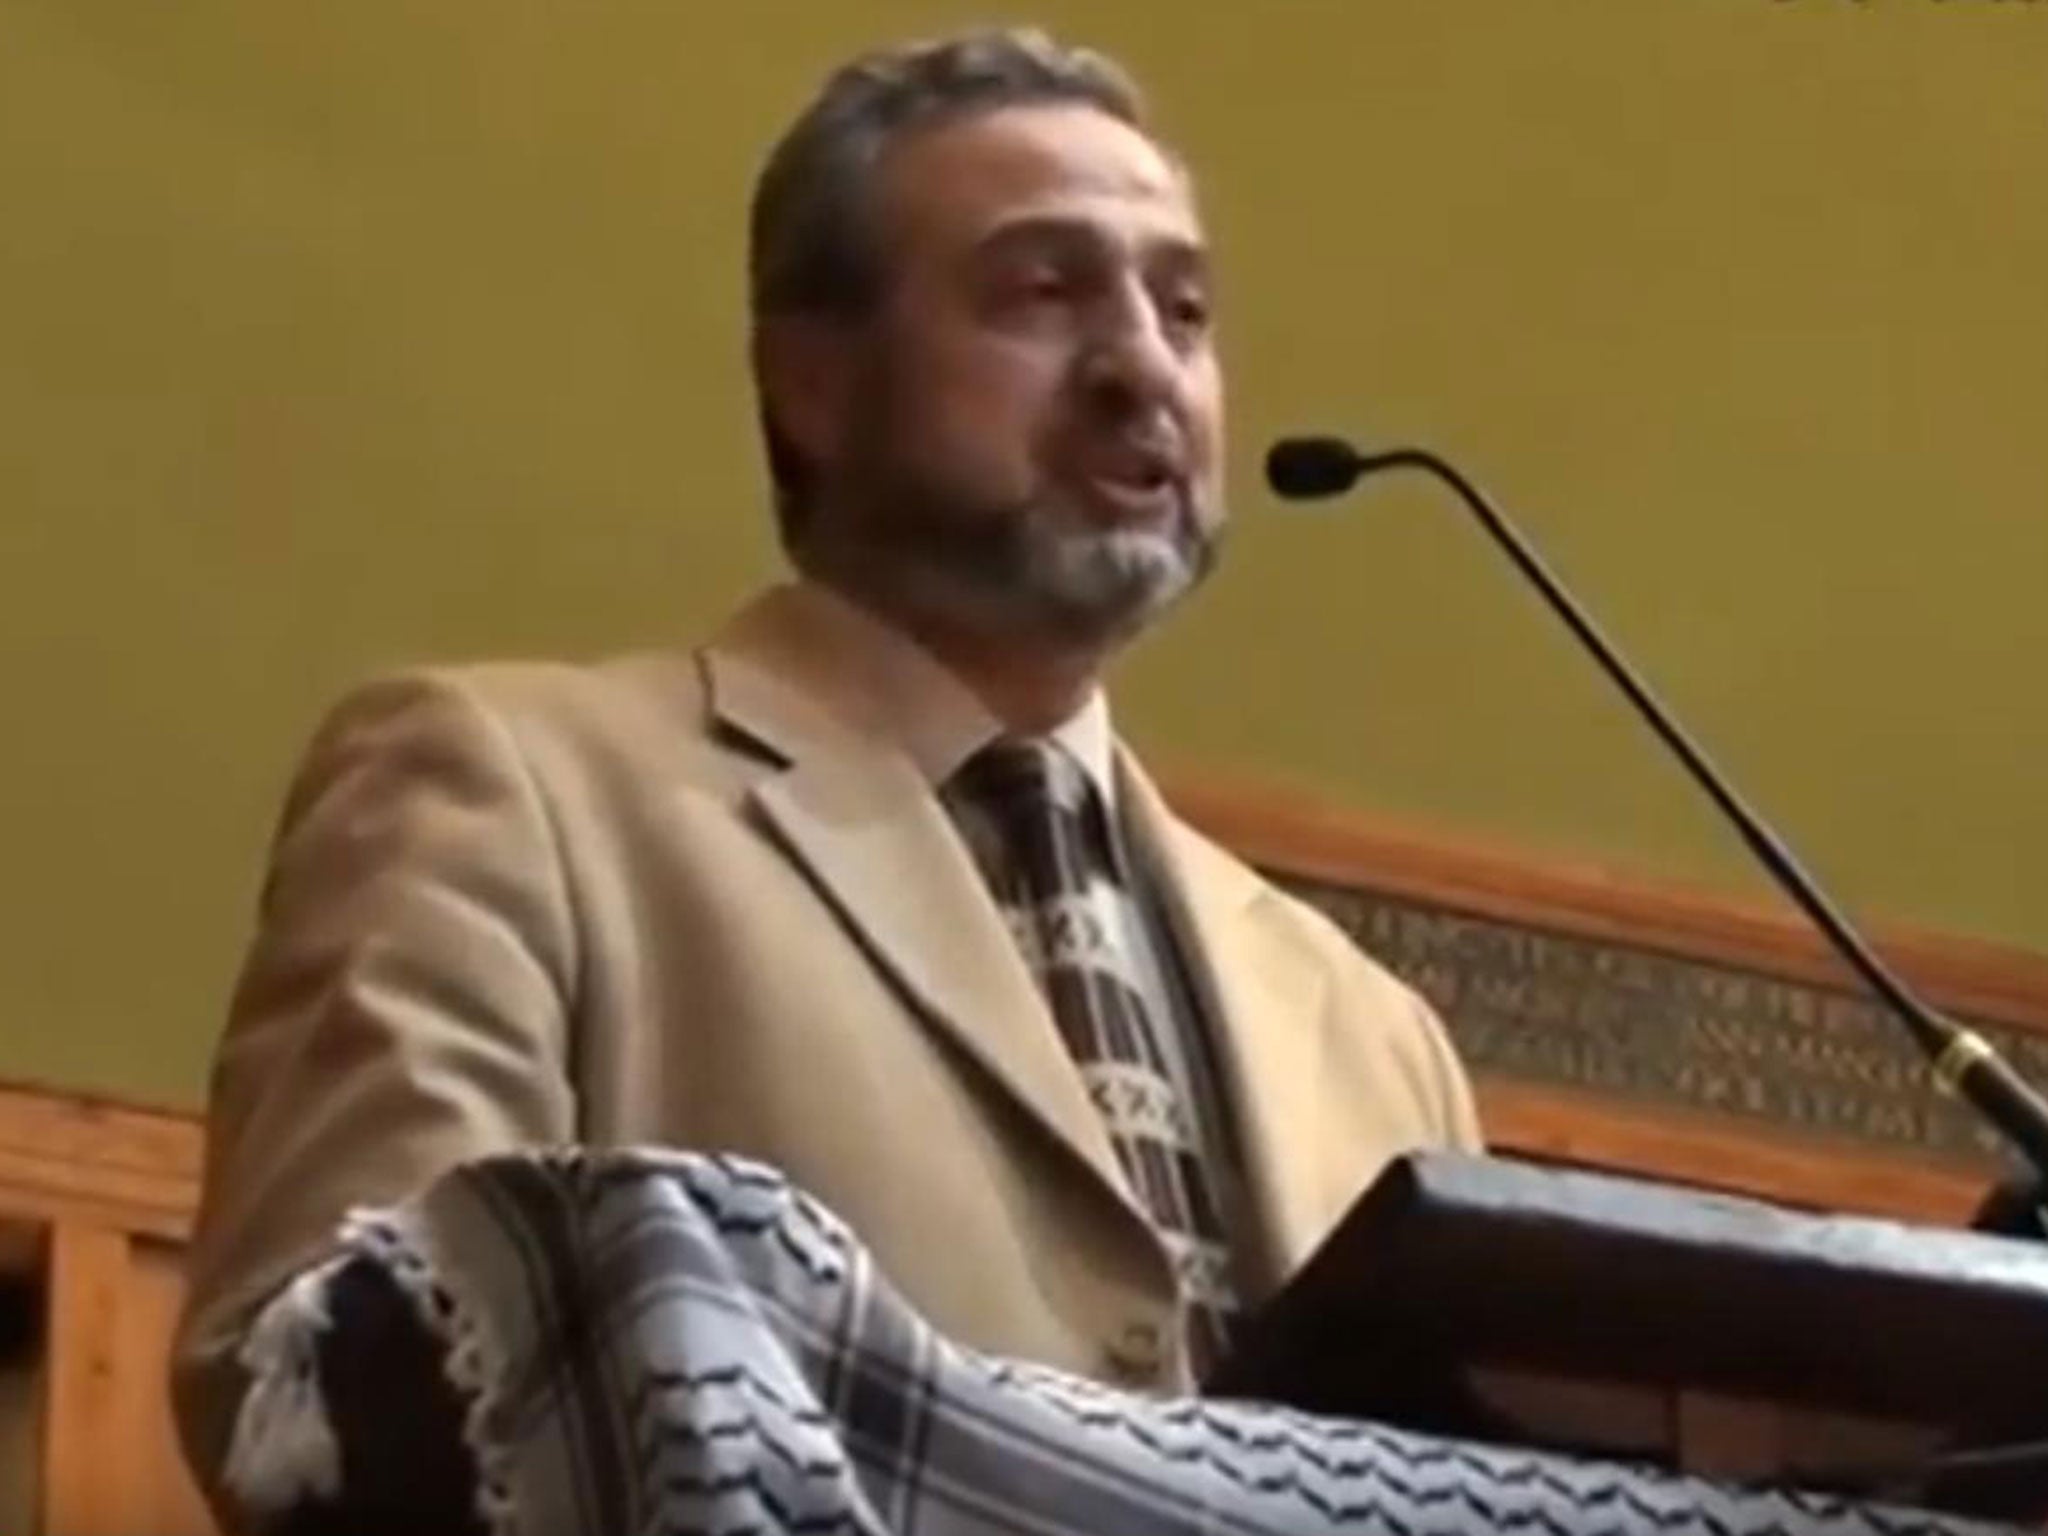 Mohammed Sawalha speaking at an event in London in 2011